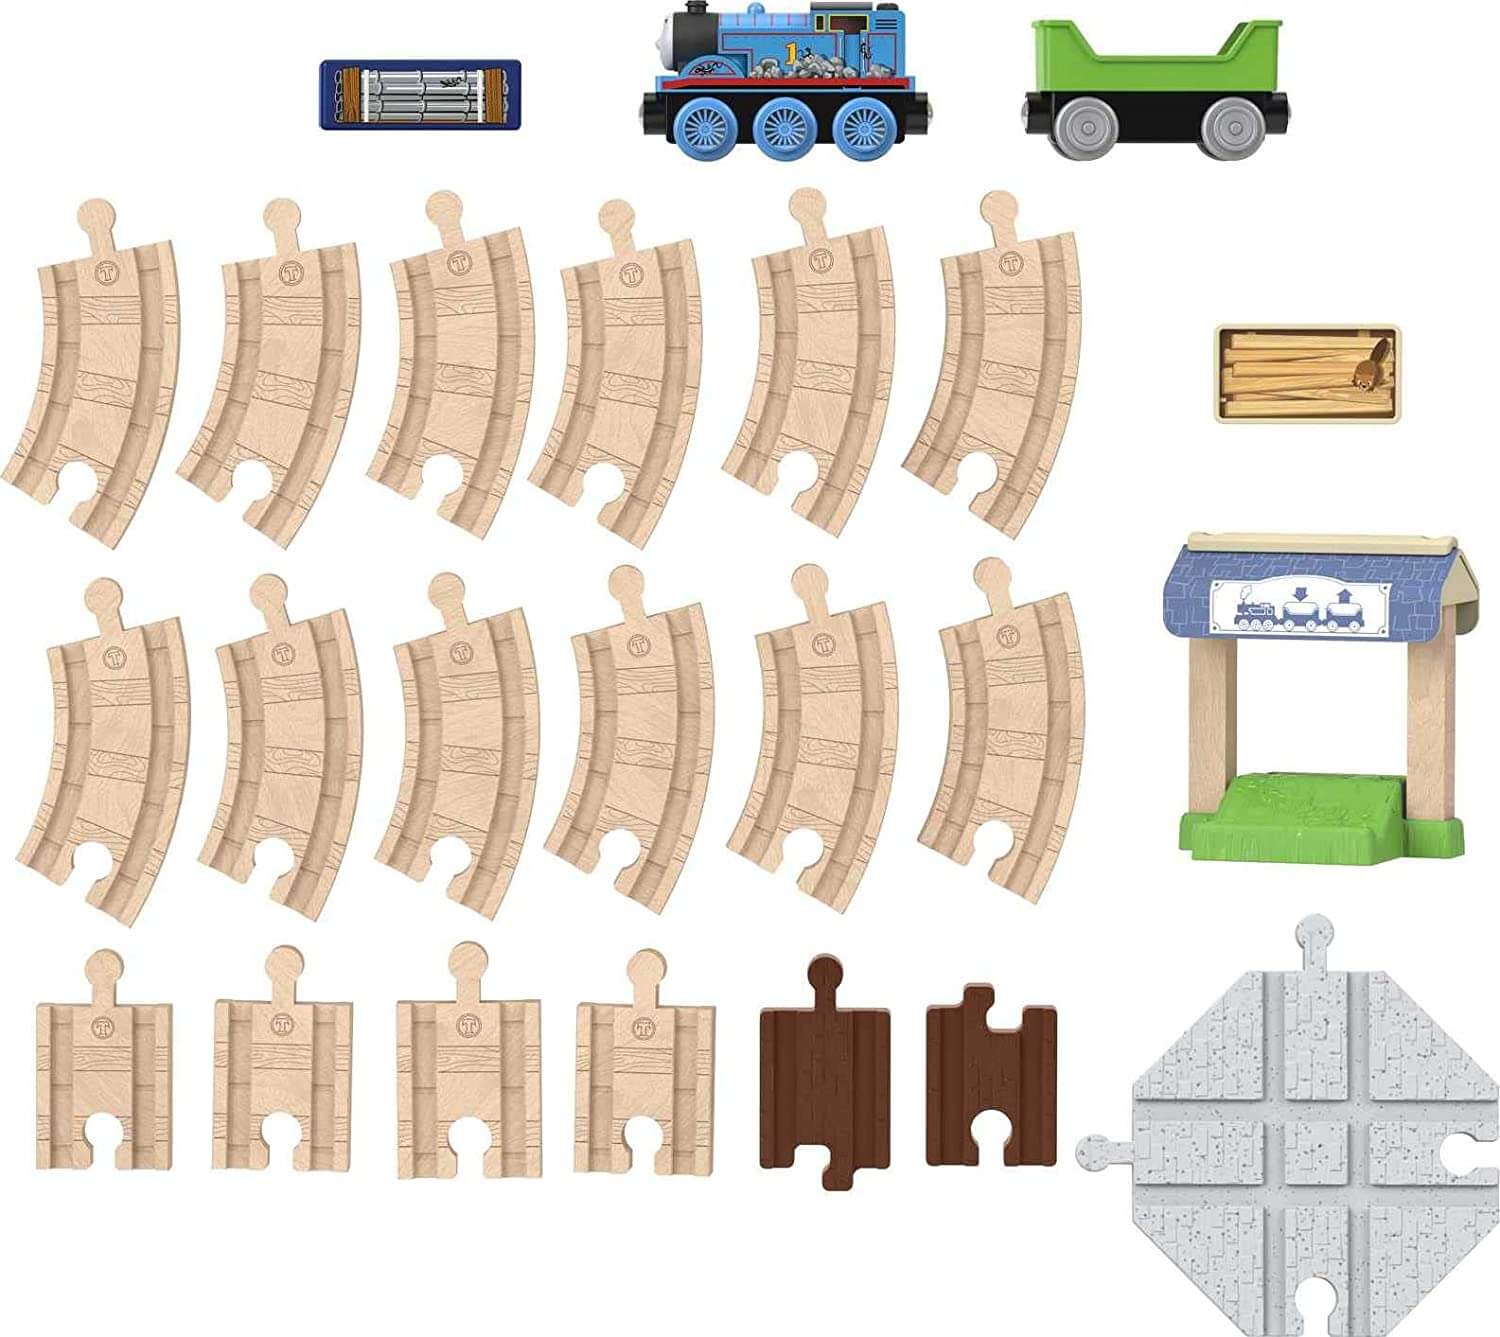 Fisher-Price Thomas & Friends Wooden Railway Figure 8 Track Pack Train Playset